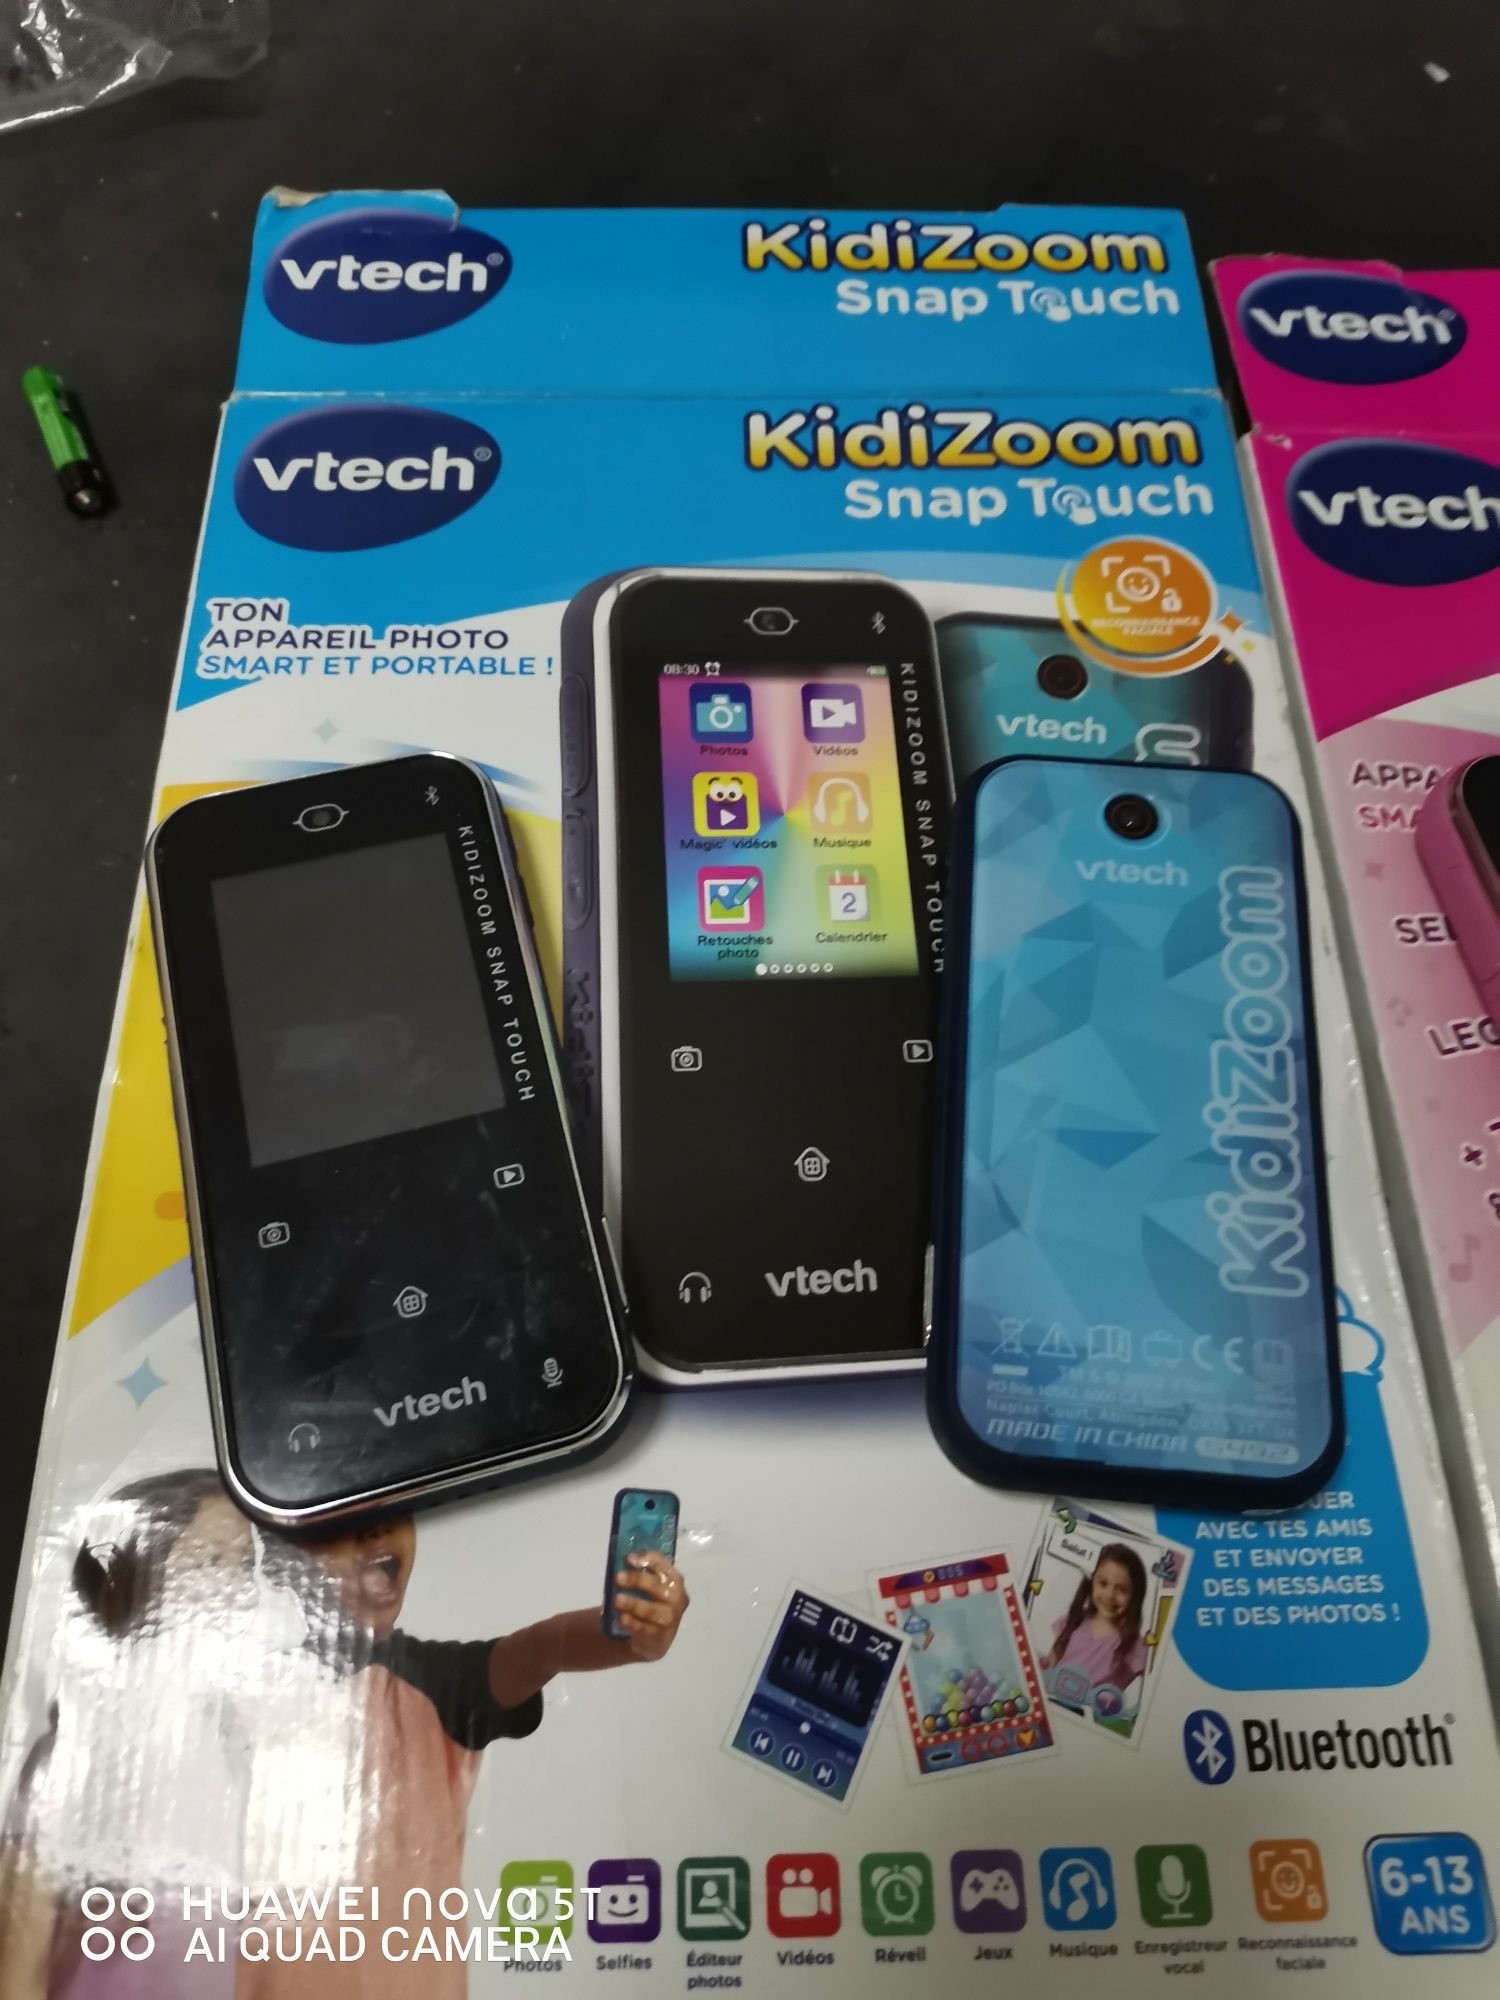 Vtech Kidizoom Snap touch